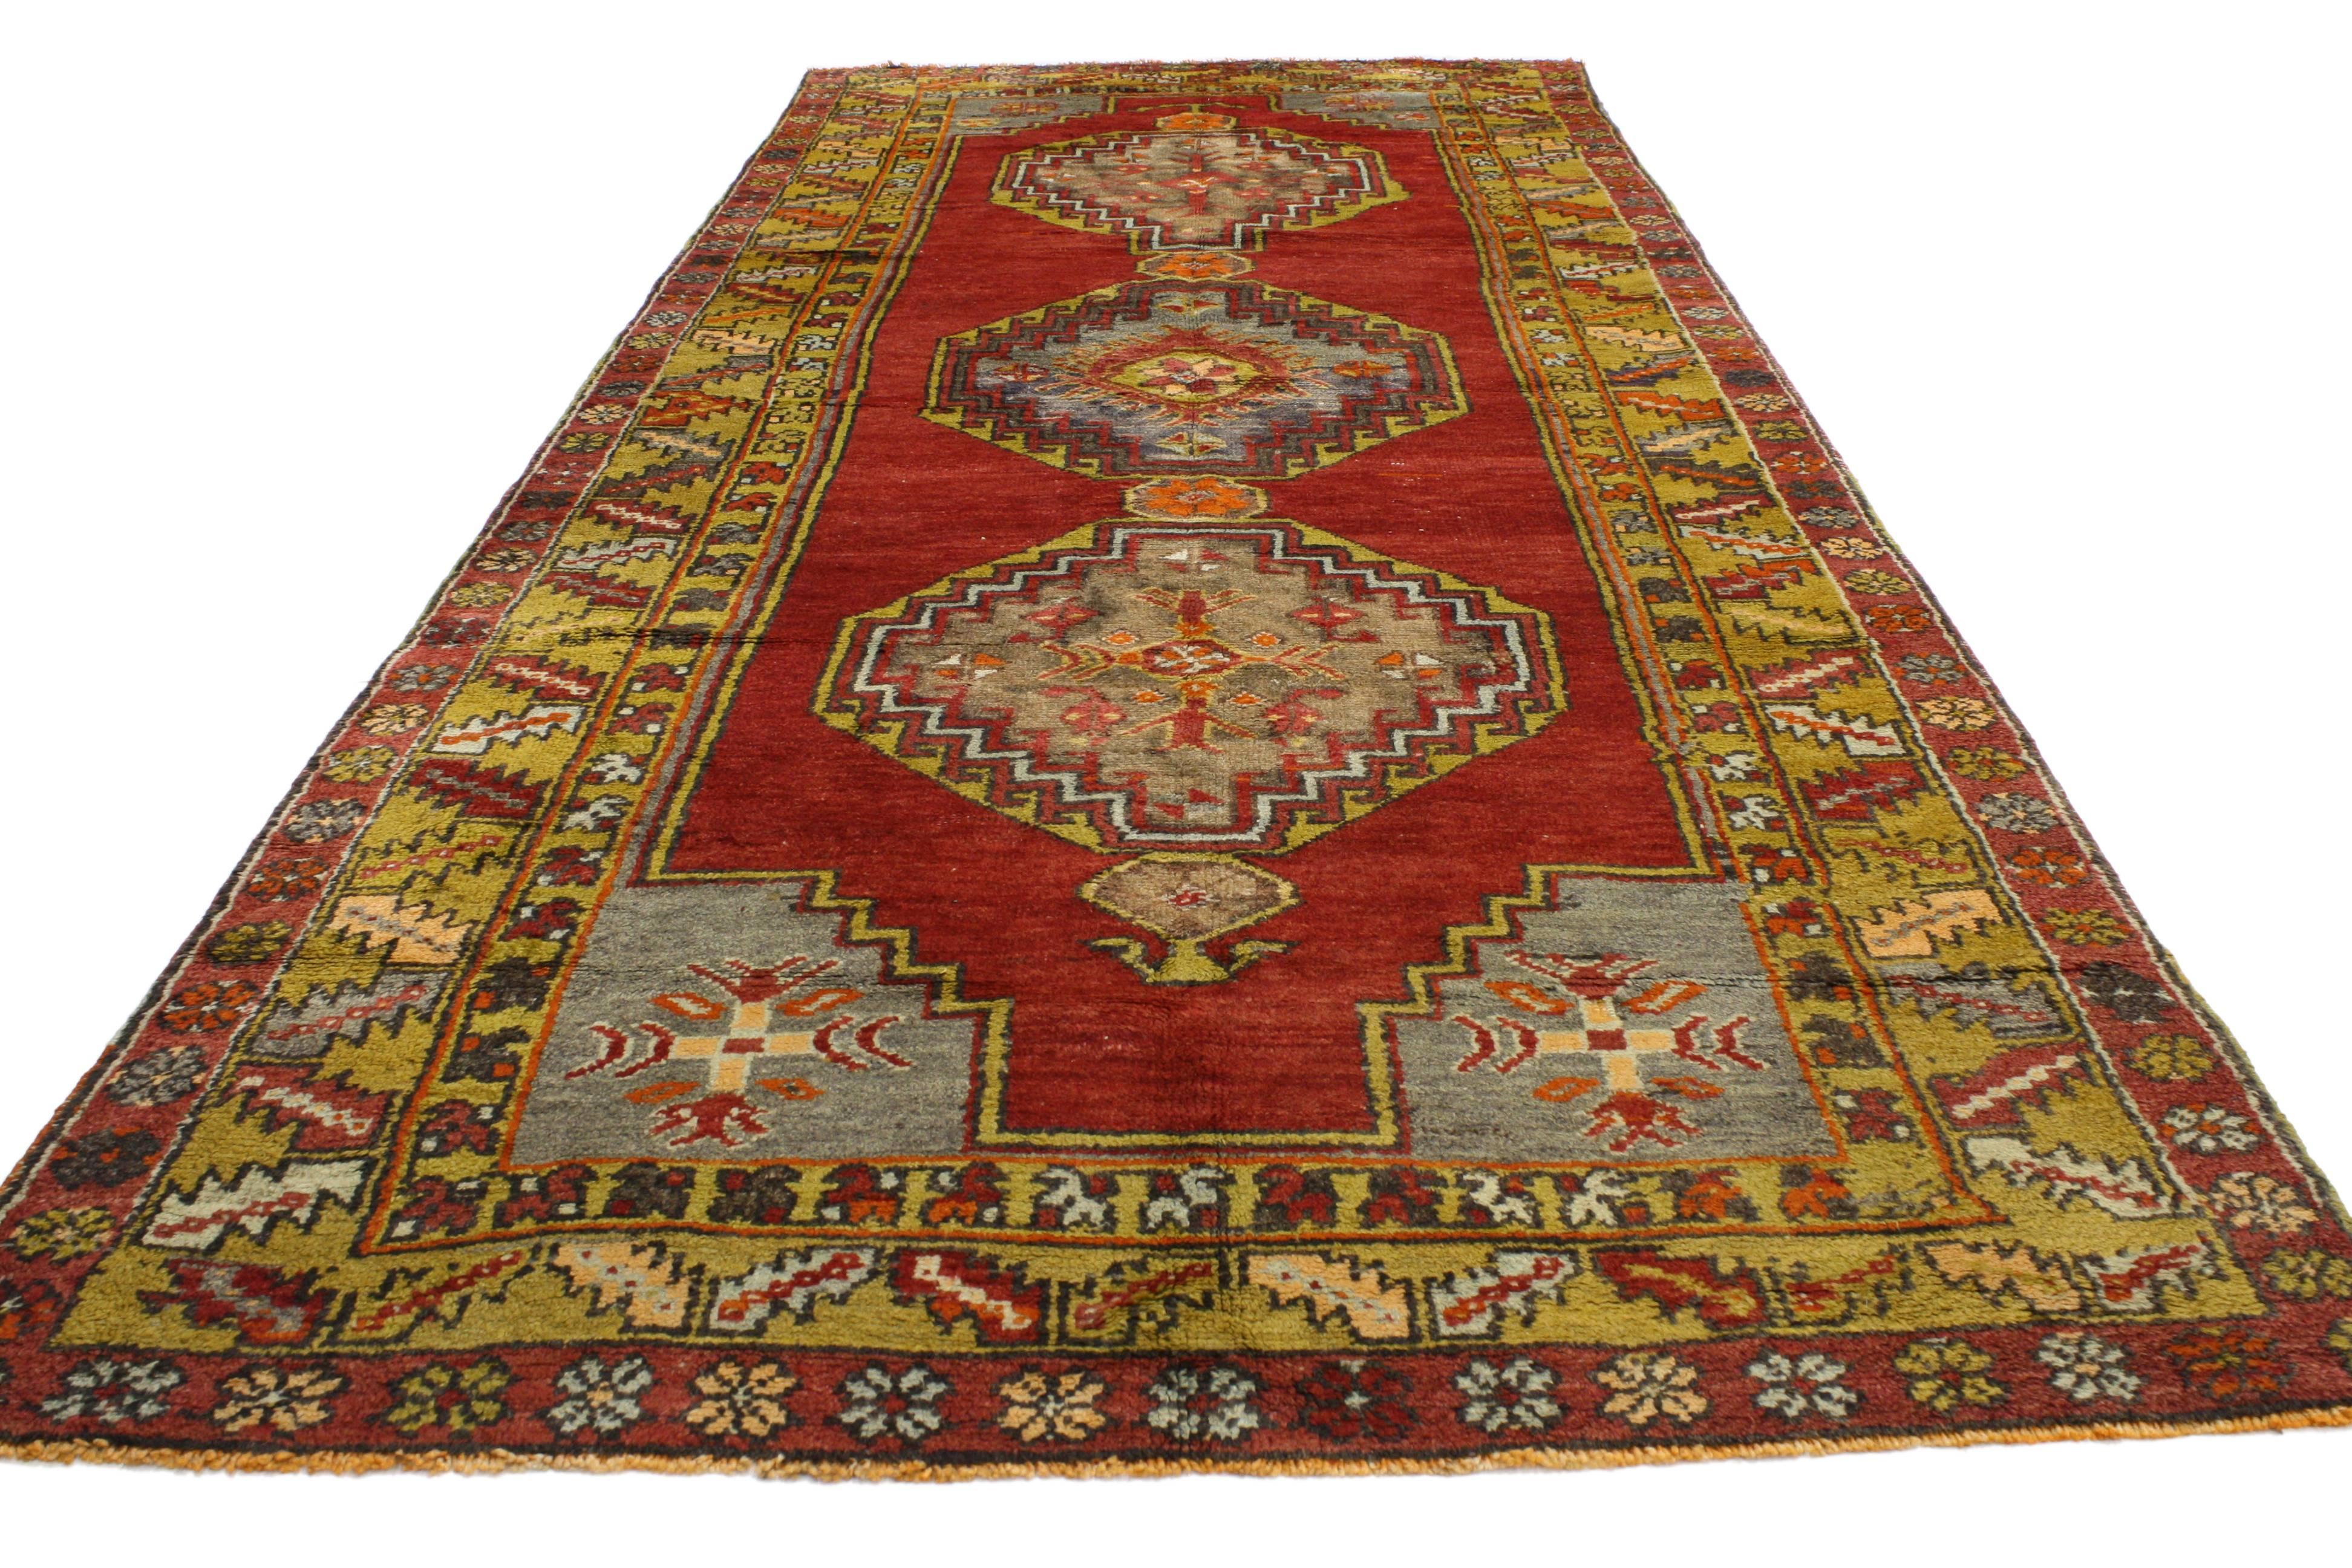 52057 Vintage Turkish Oushak Runner with Modern Tribal Style, Wide Hallway Runner. This hand-knotted wool vintage Turkish Oushak carpet runner features three hexagonal medallions with hooked edges on an abrashed red field. It is enclosed with gray